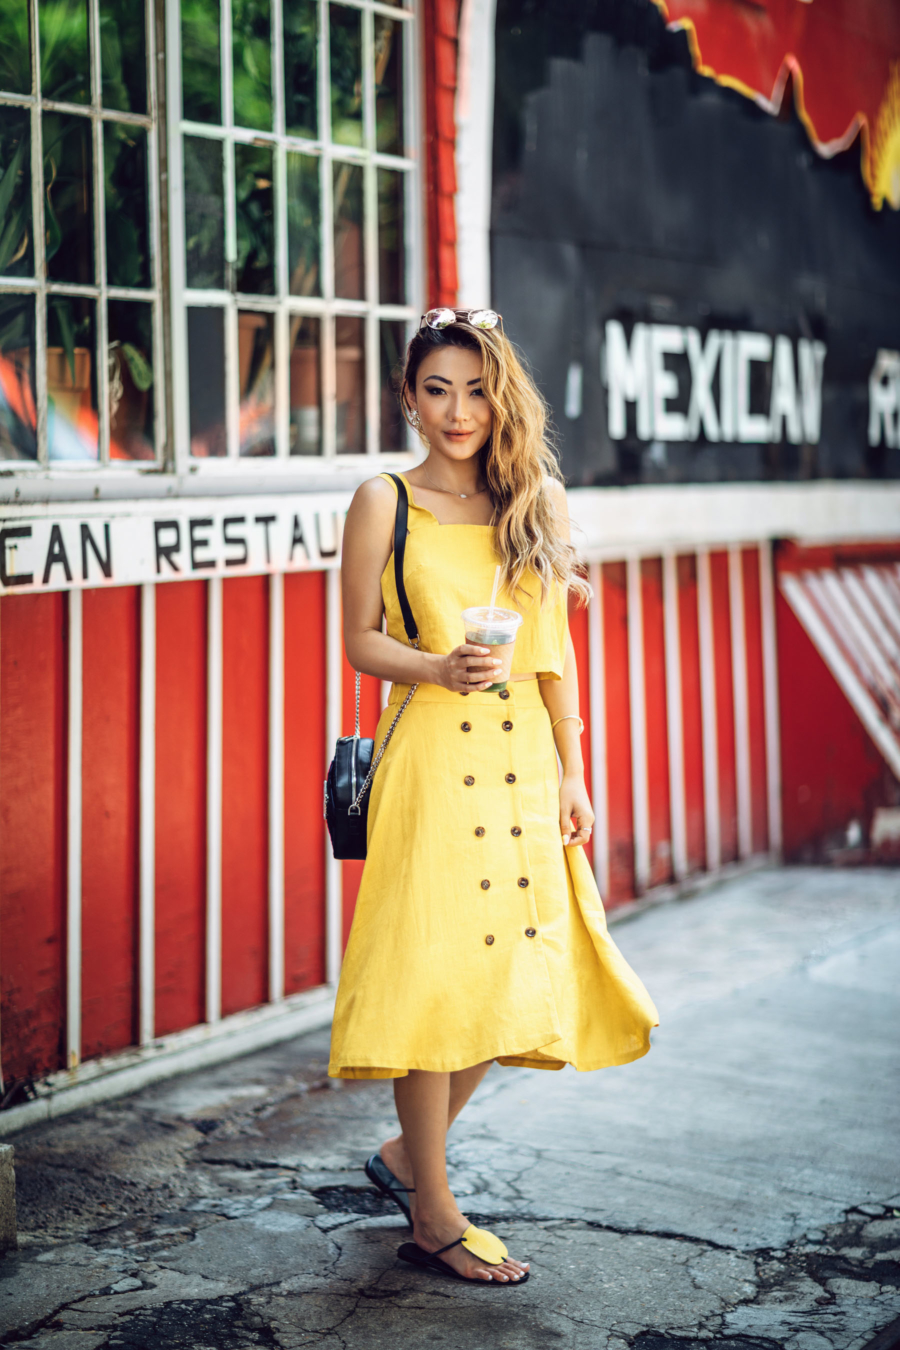 5 Best Colors to Wear This Summer & Stand Out - Yellow button down dress // Notjessfashion.com